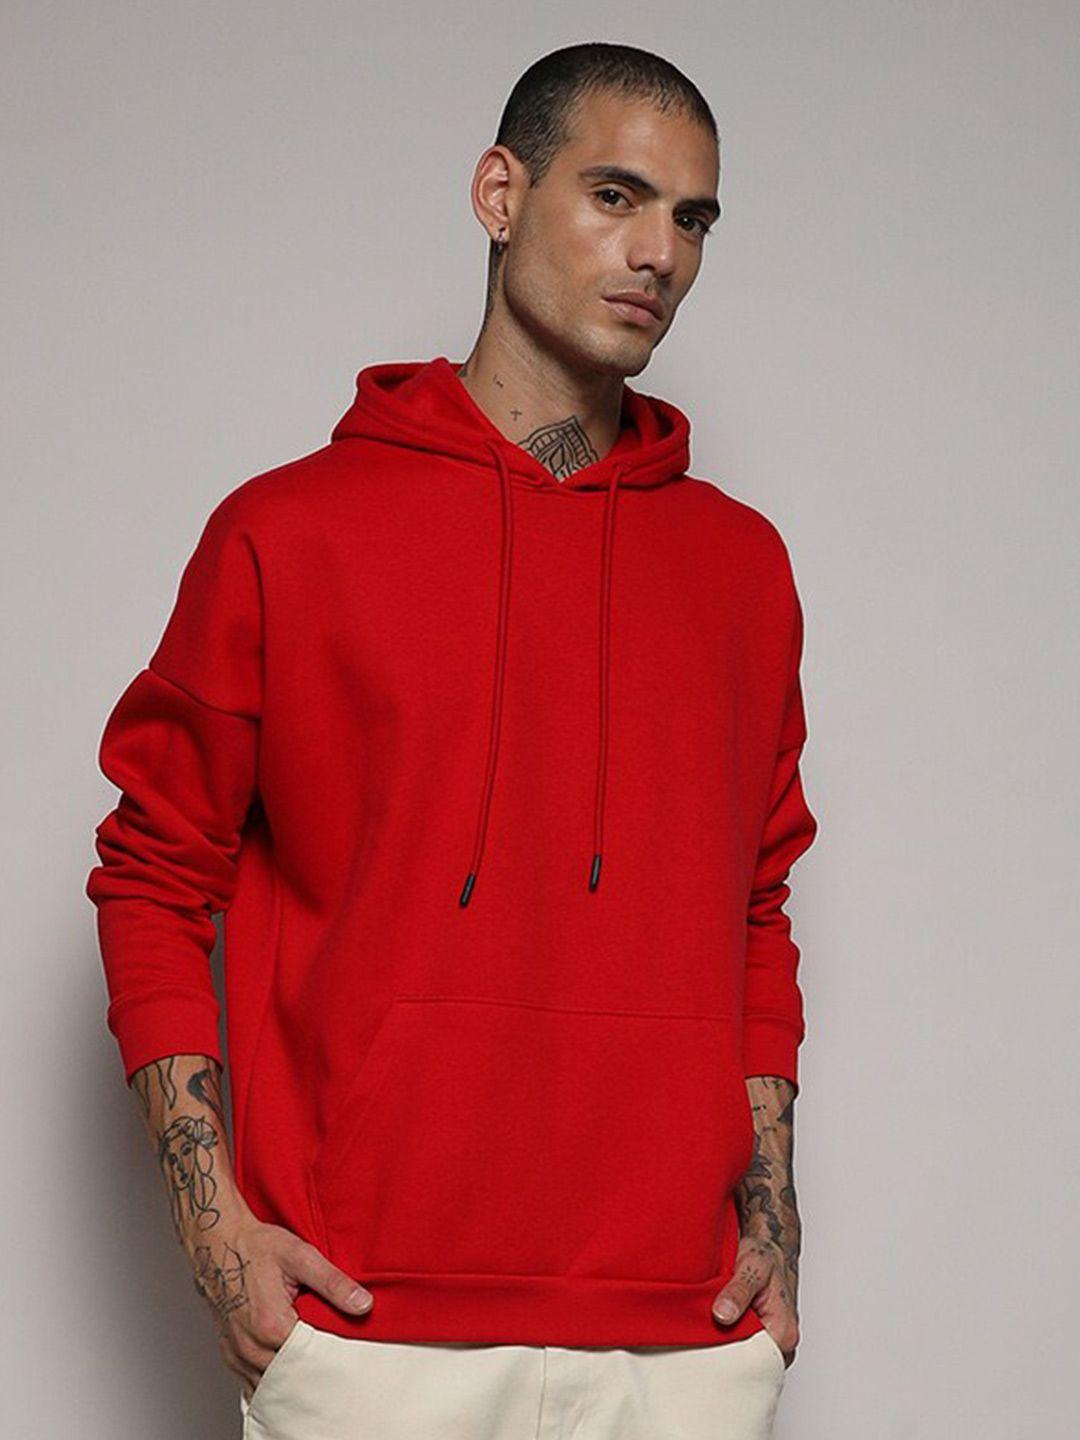 campus sutra red long sleeves cotton hooded pullover sweatshirt